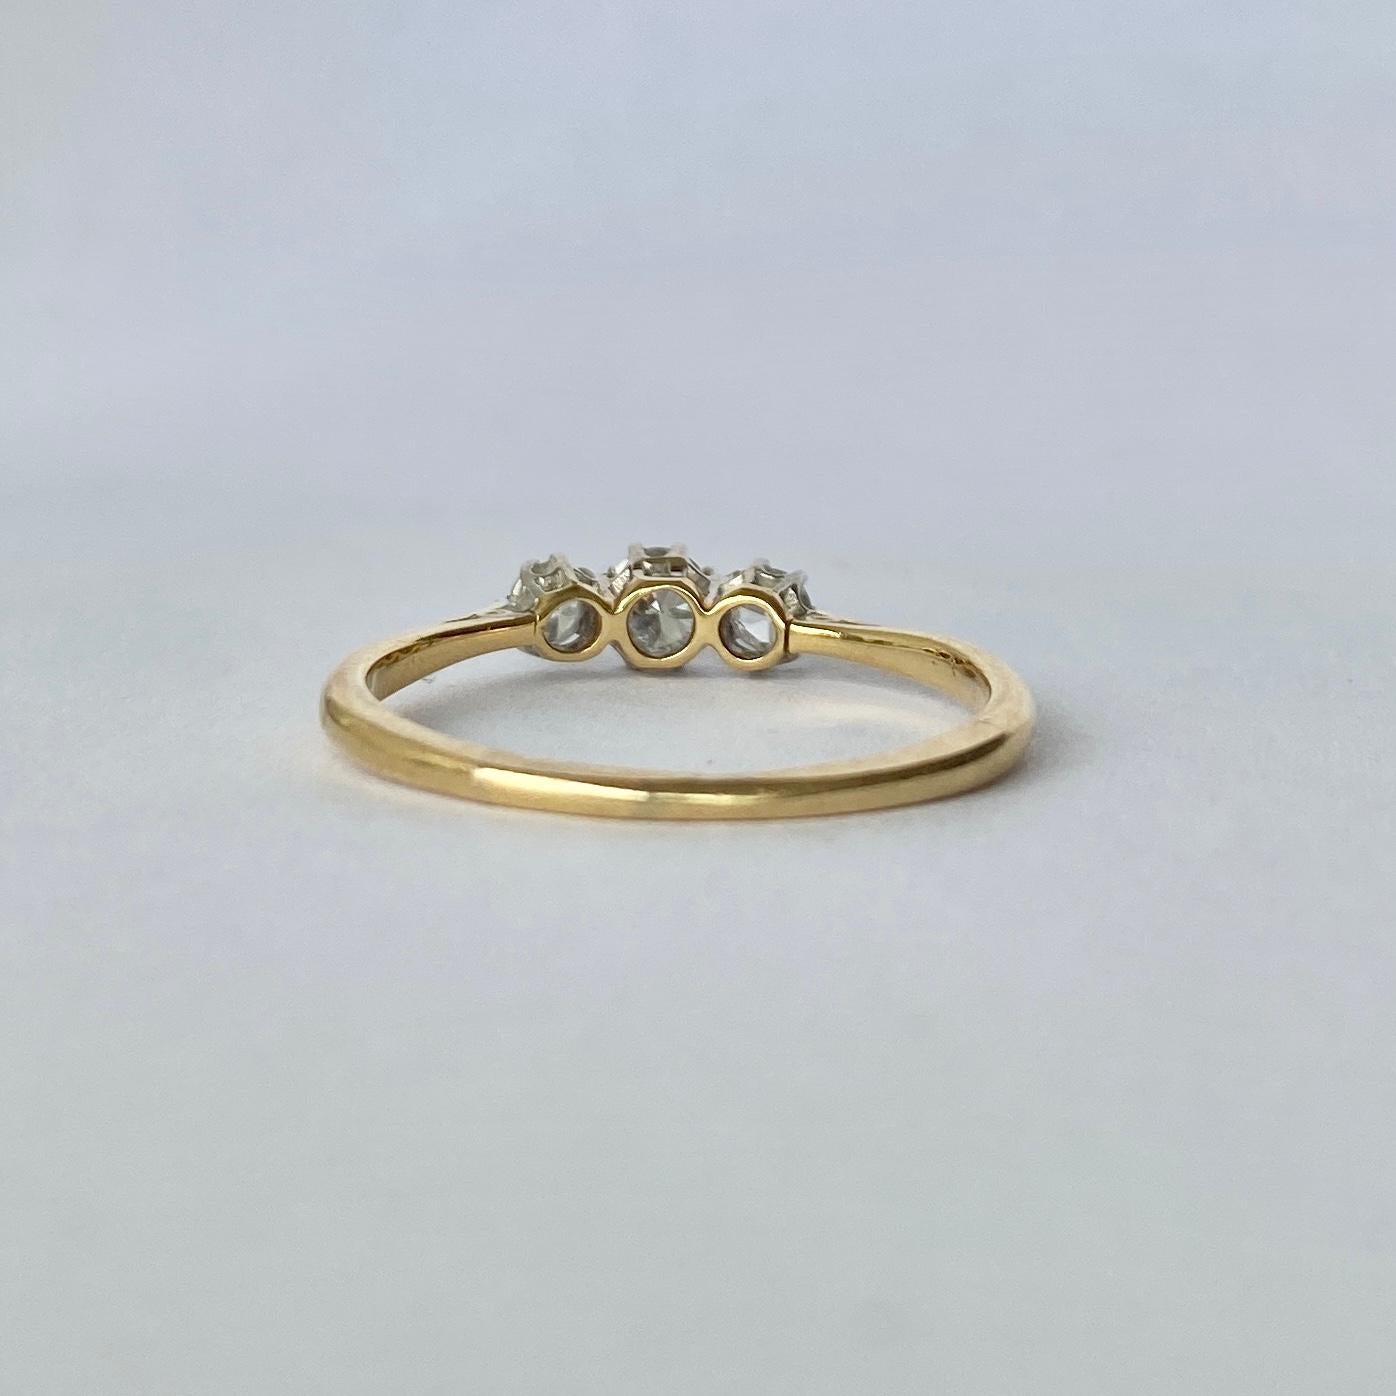 The diamonds in this ring total 60pts and old European cut and are bright and sparkly. They are held in very subtle platinum calaws upon an 18carat gold band. 

Ring Size: Q or 8 

Weight: 2g